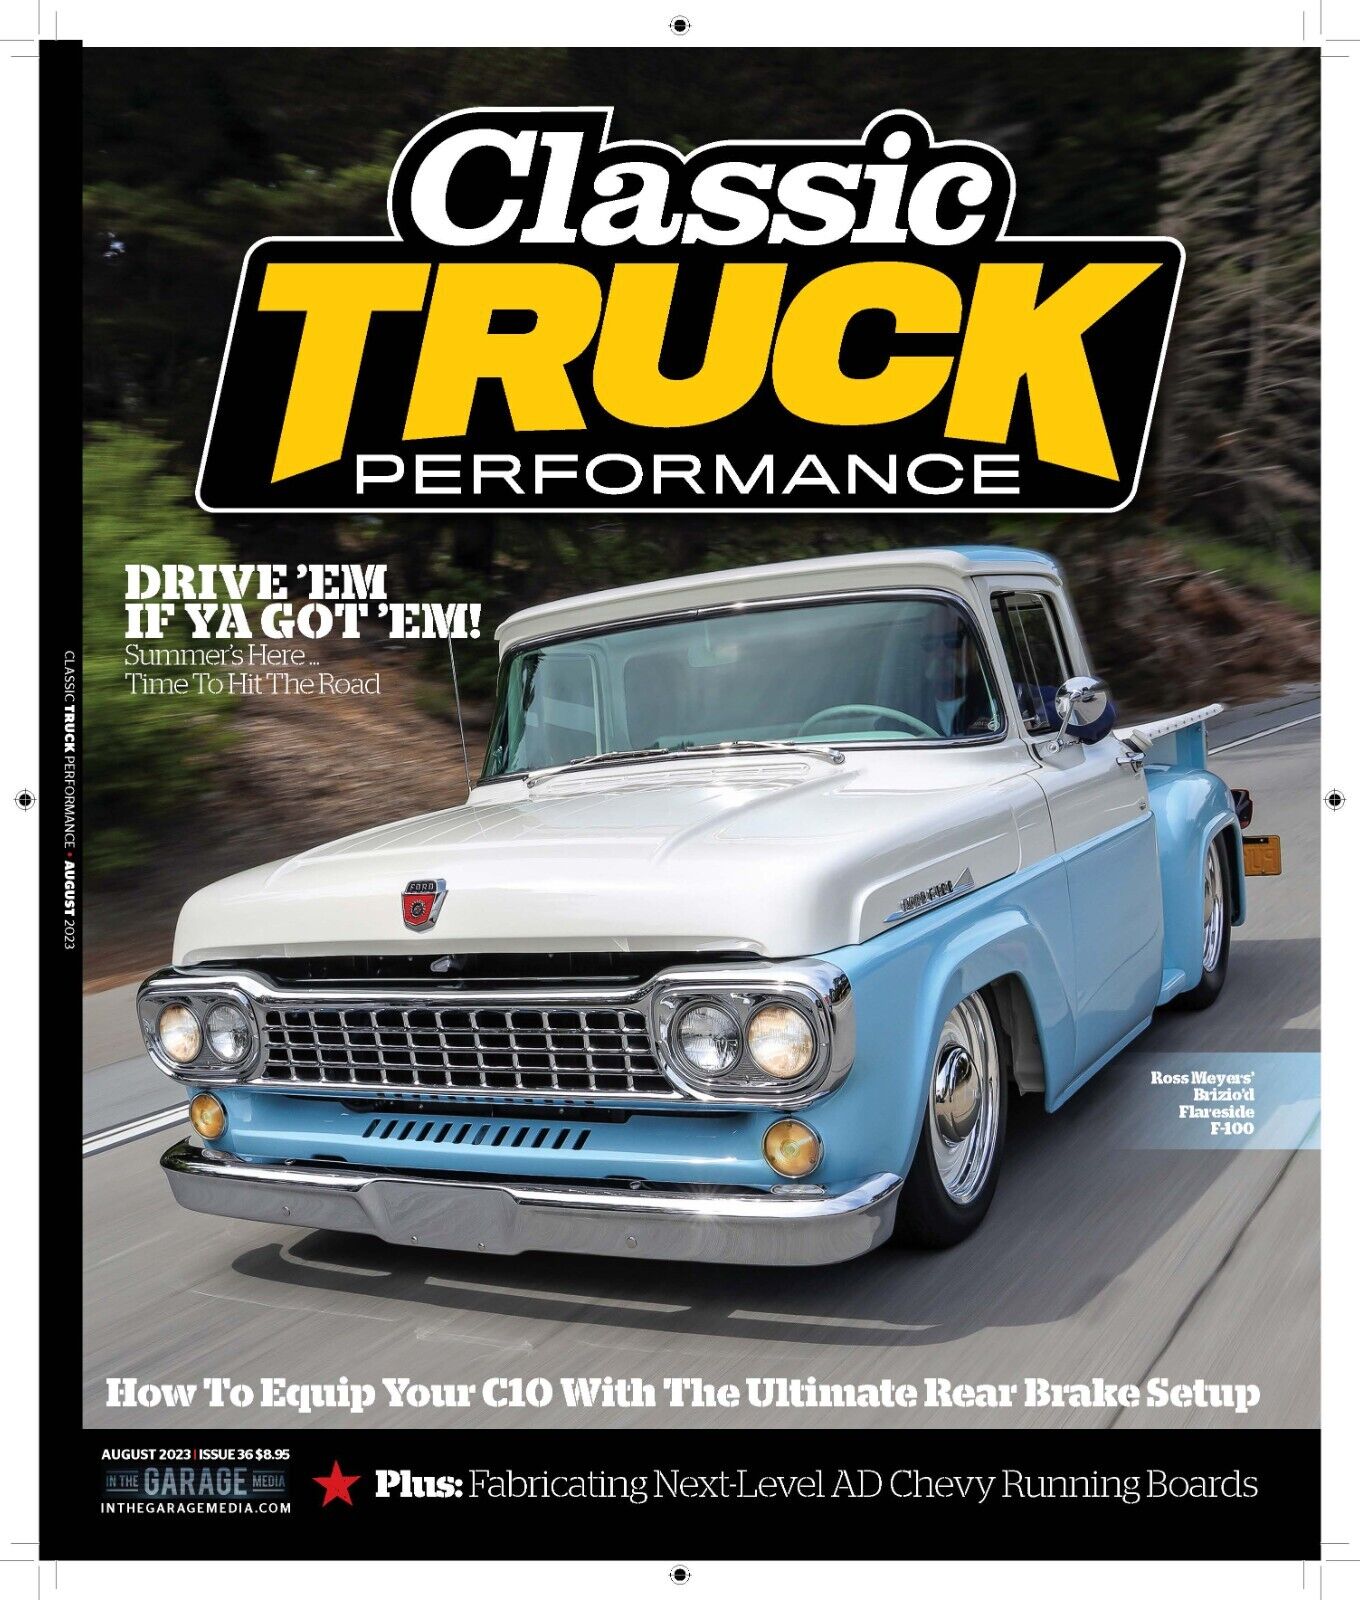 Classic Truck Performance Magazine Issue #36 August 2023 - New